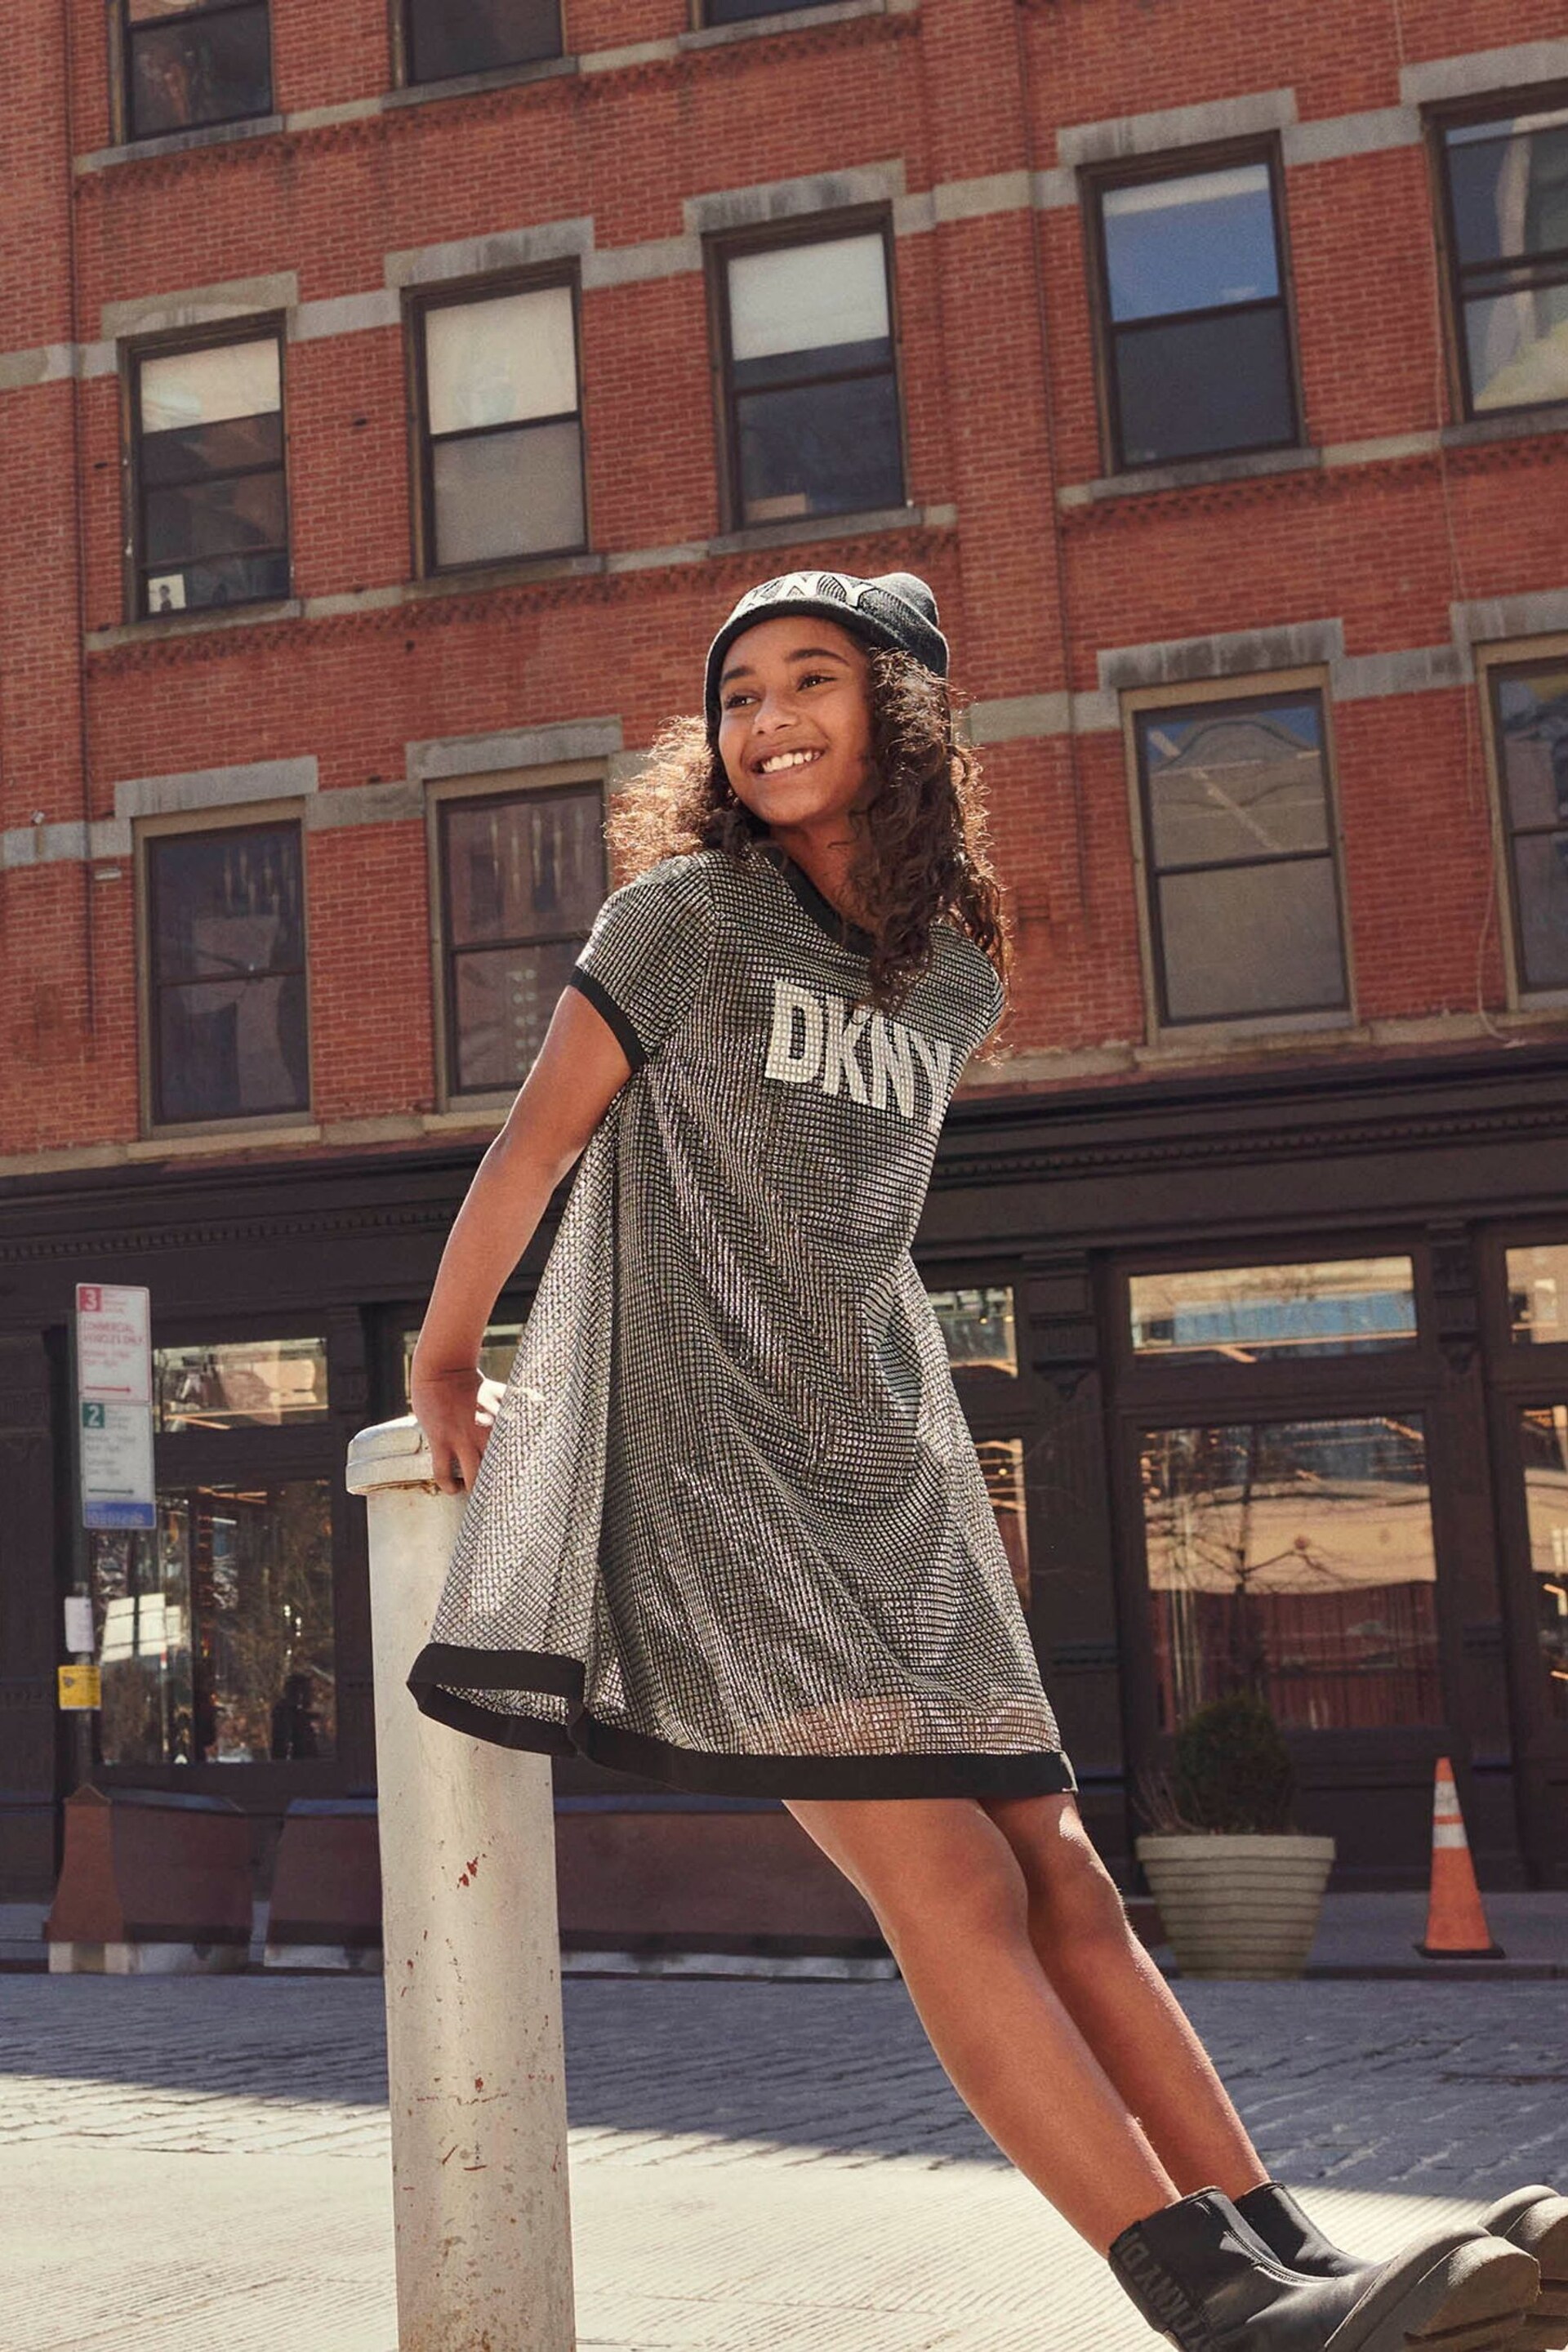 DKNY Silver 2-In-1 Layered Logo Dress - Image 1 of 4